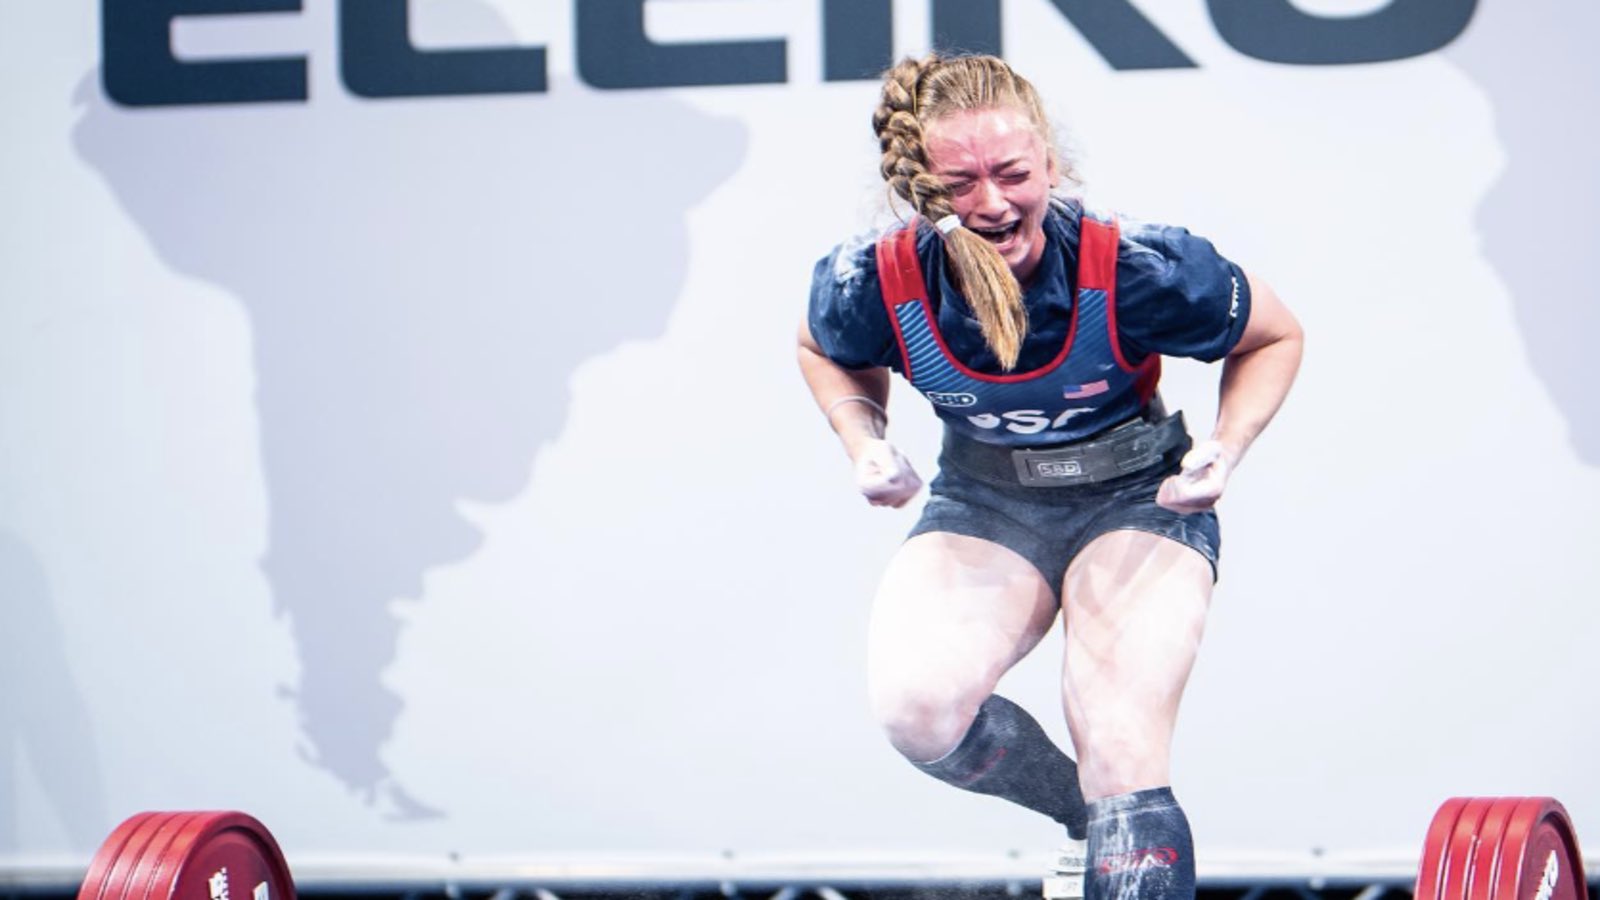 Natalie Richards (57KG) Scores Raw IPF World Record Total of 512.5